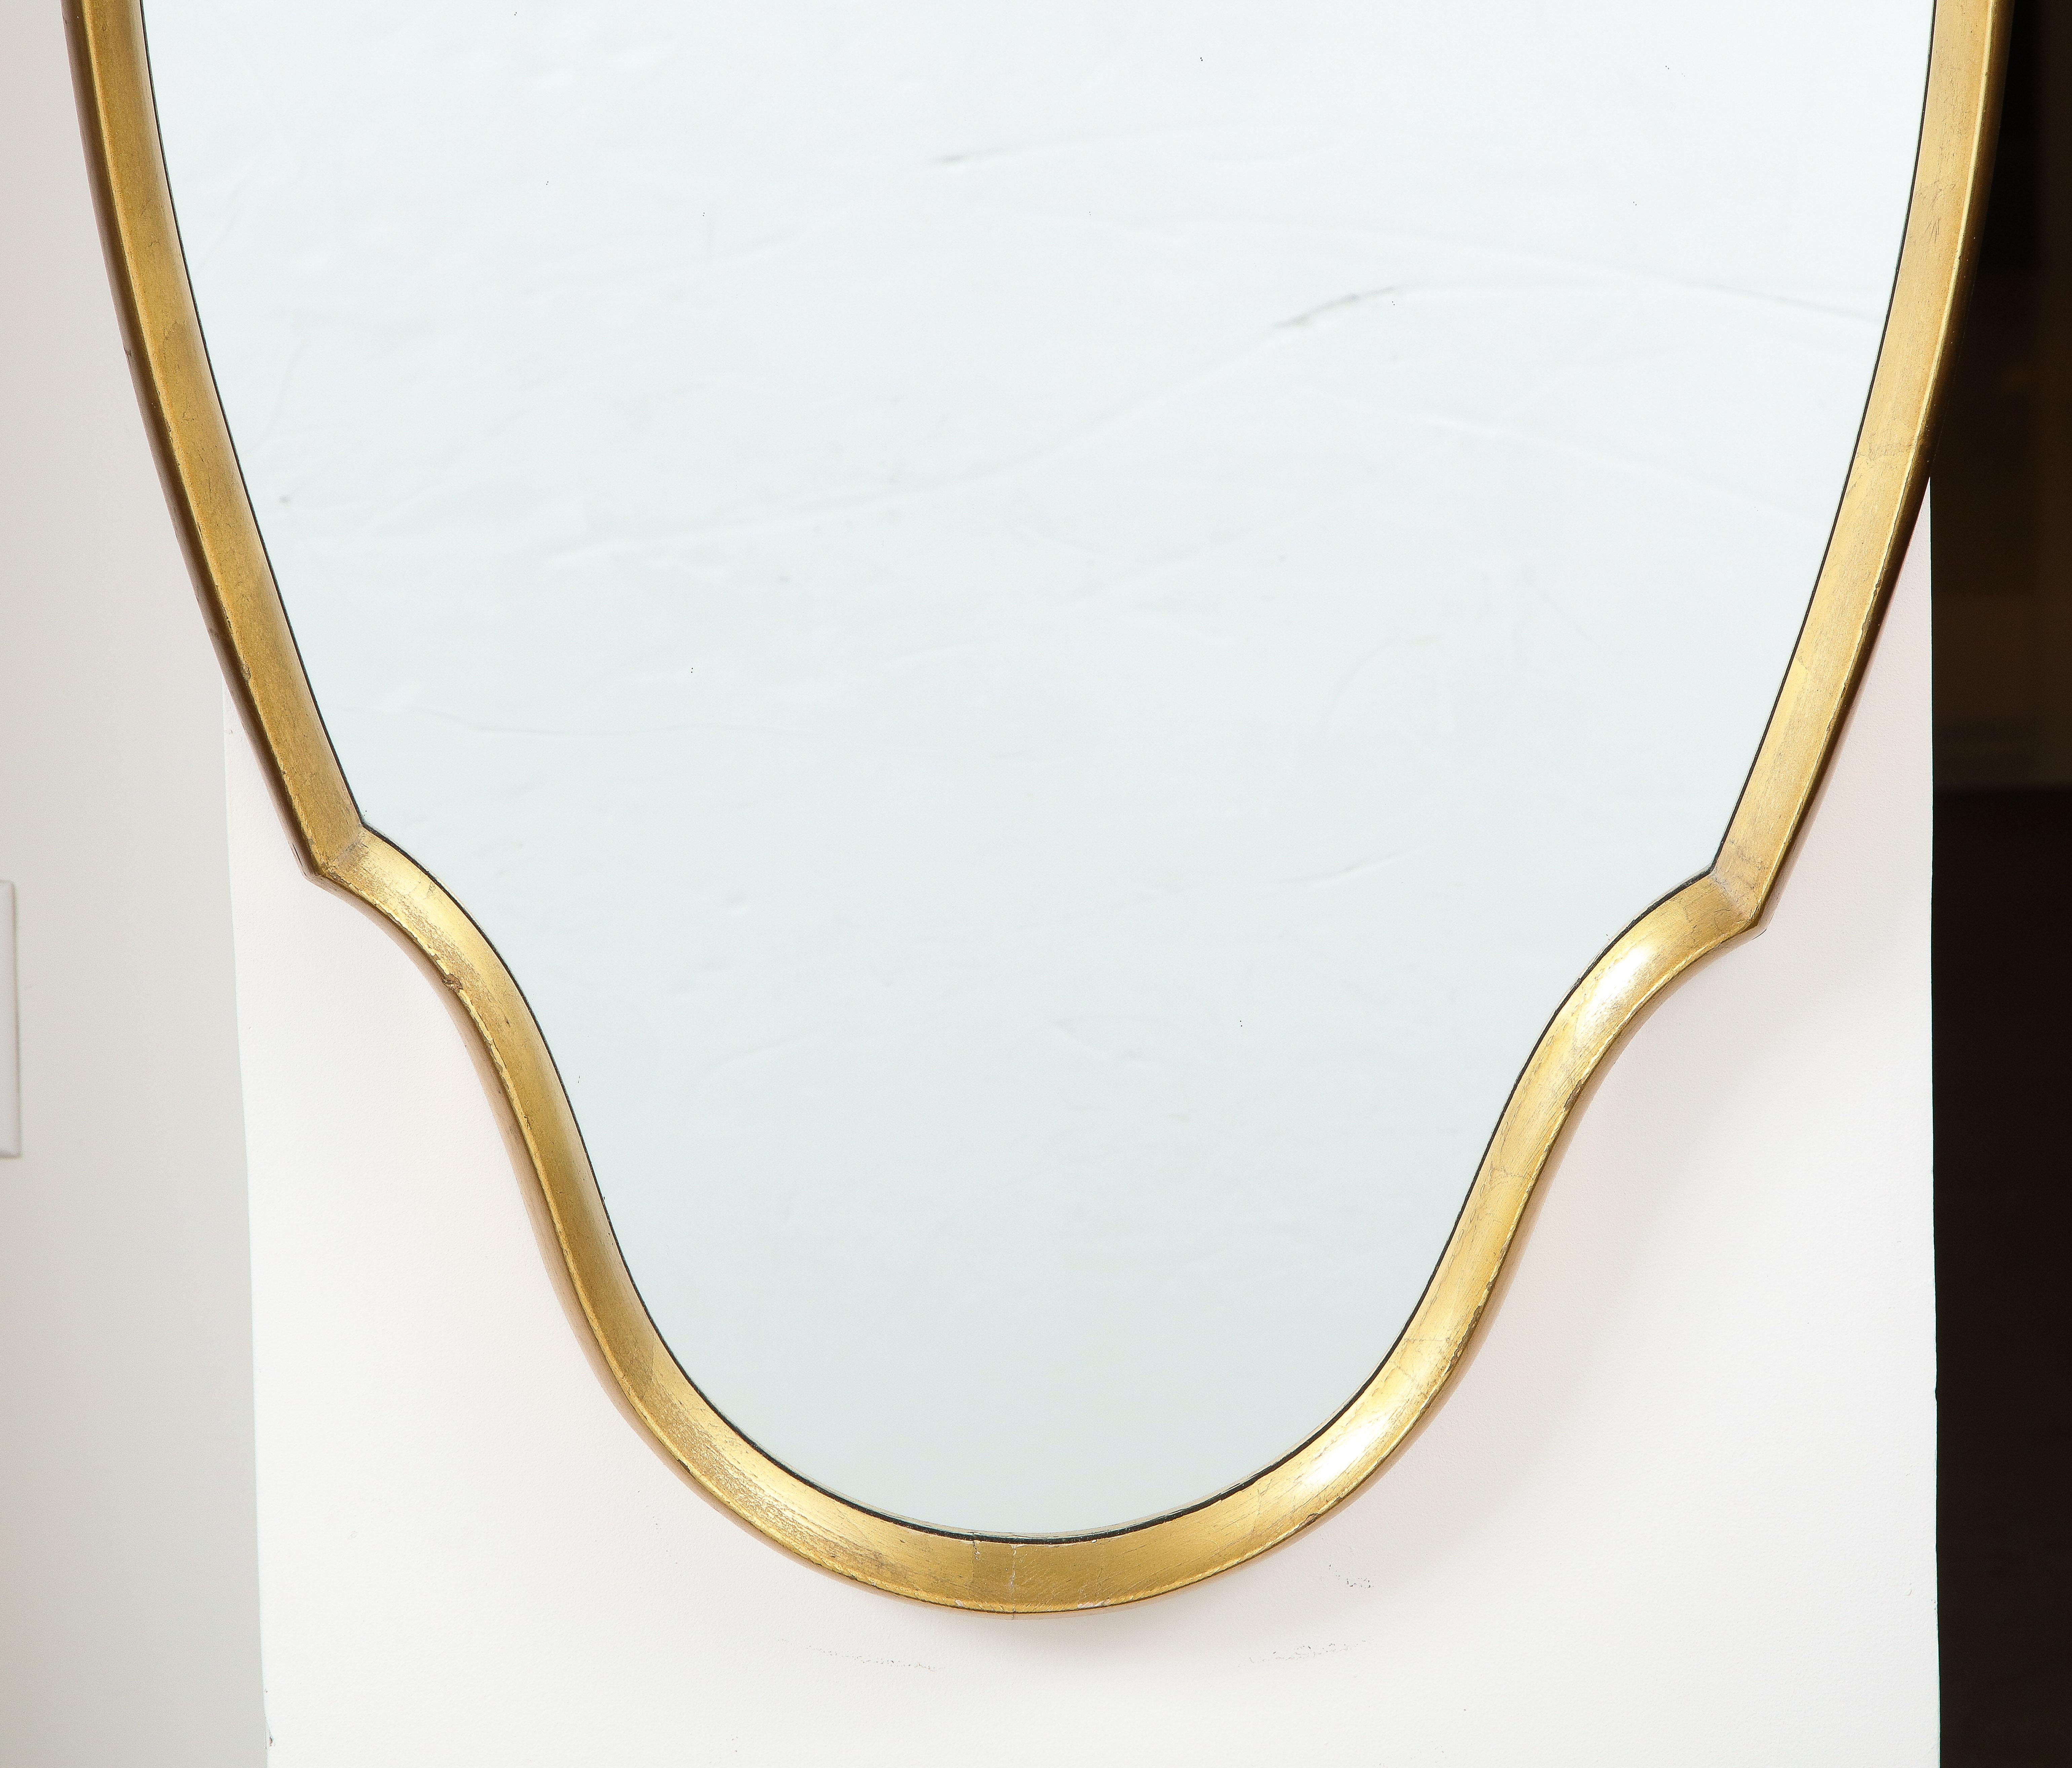 1960's Mid-Century Modern Gold Leaf Mirror in the Style of La Barge For Sale 4